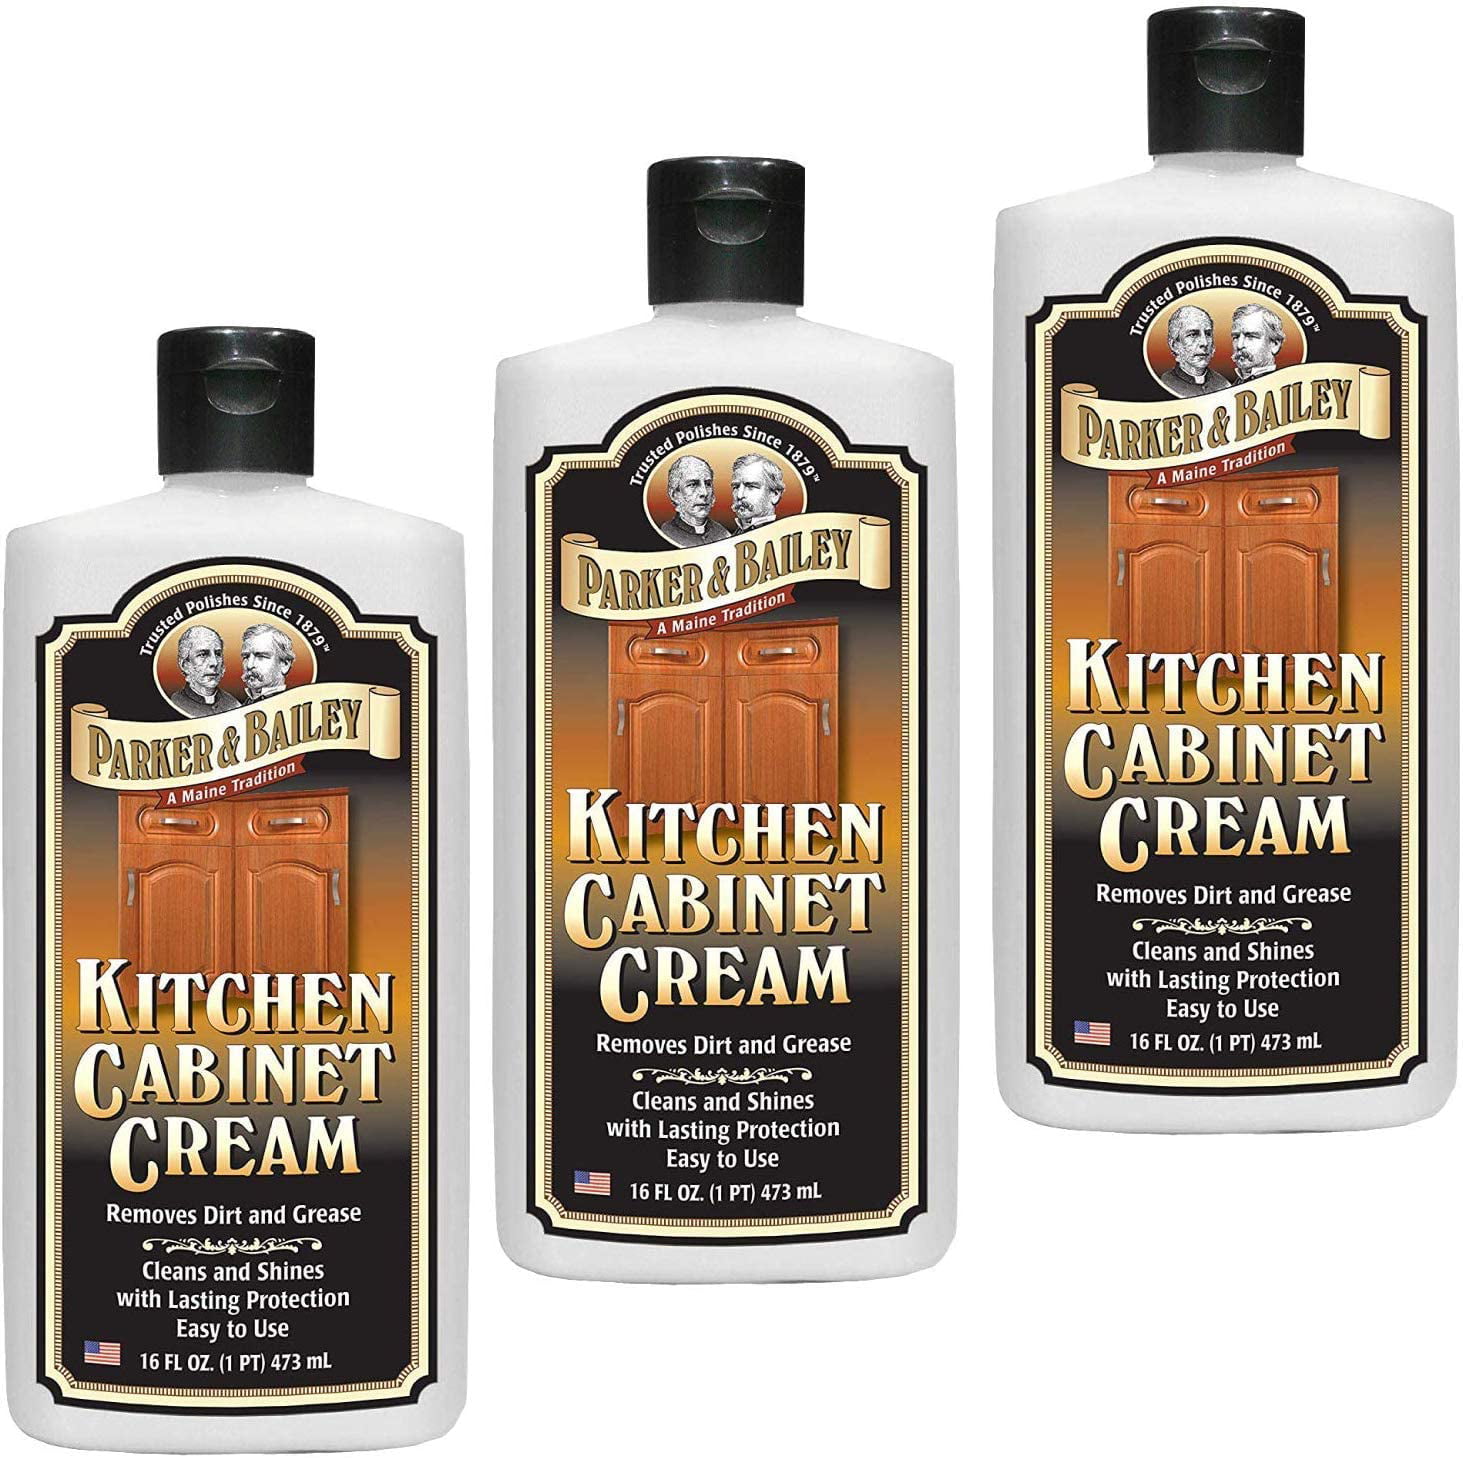 Simple Parker And Bailey Kitchen Cabinet Cream for Small Space